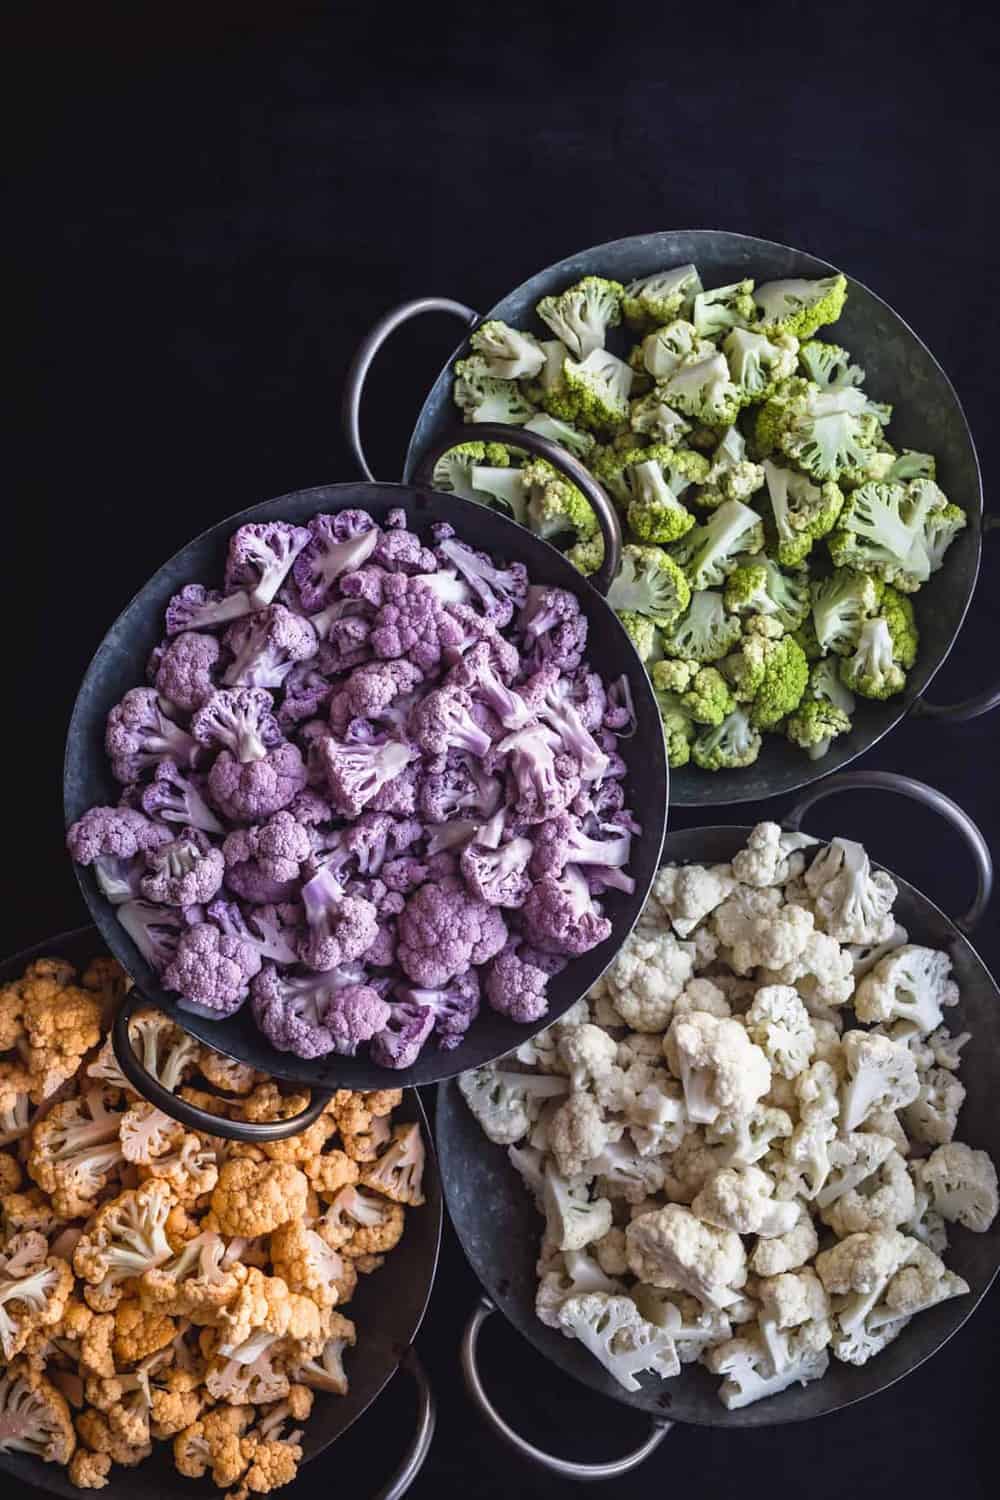 Yellow/Orange, Purple, White, and Green Cauliflower, each cut into florets and separated by color into 4 silvers bowls with handles, on a black background.